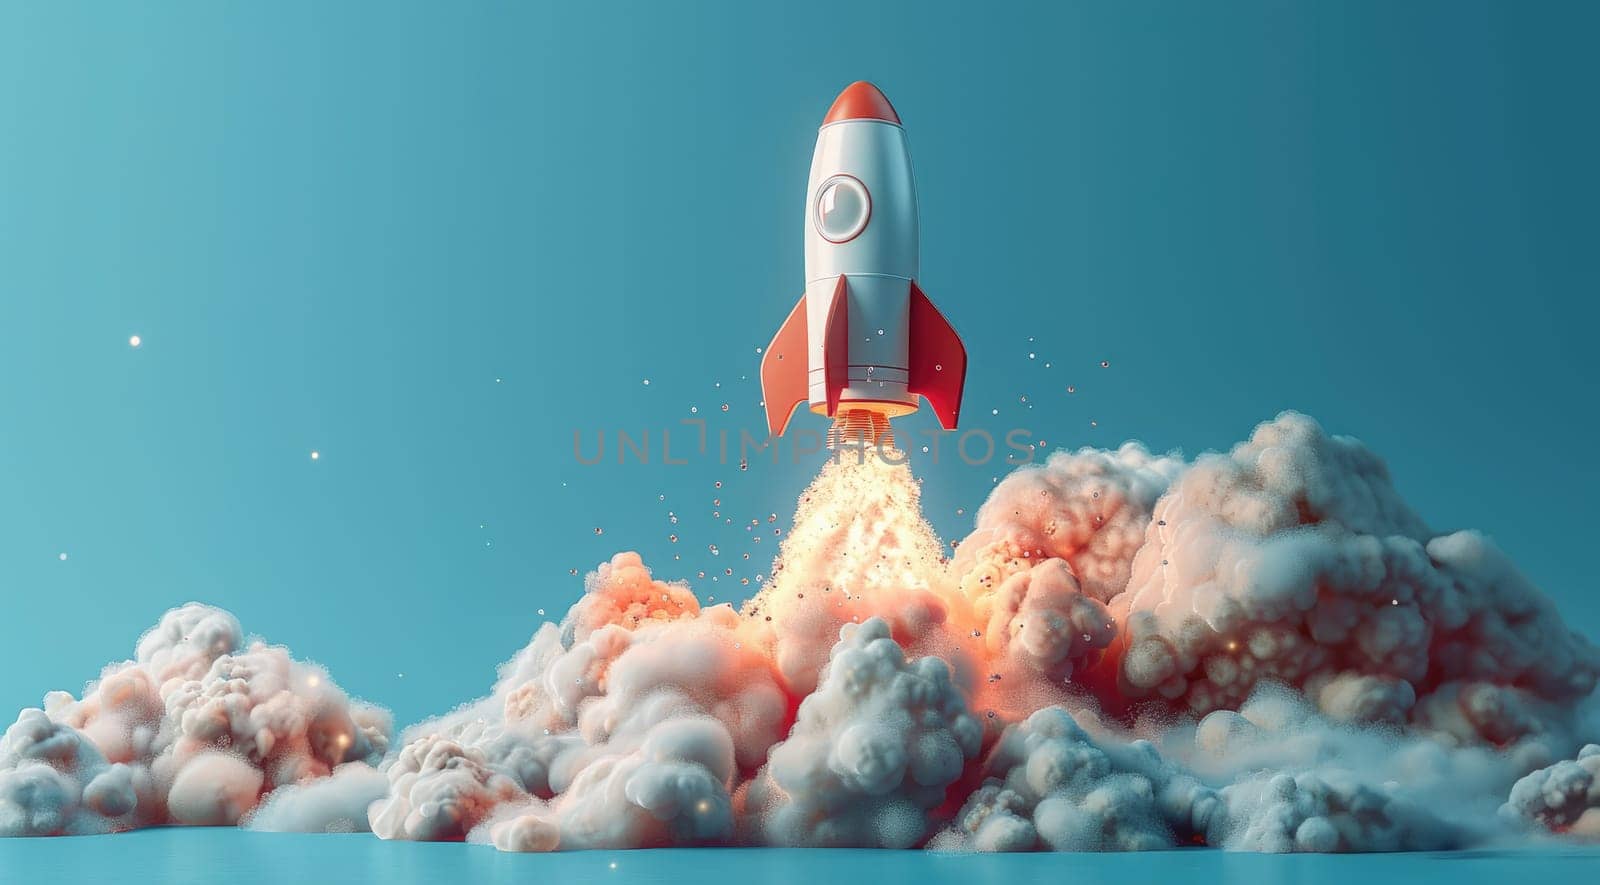 A rocket is launching into the sky, leaving a trail of smoke and fire behind it. Concept of excitement and wonder, as the rocket soars through the air, leaving a trail of its journey behind